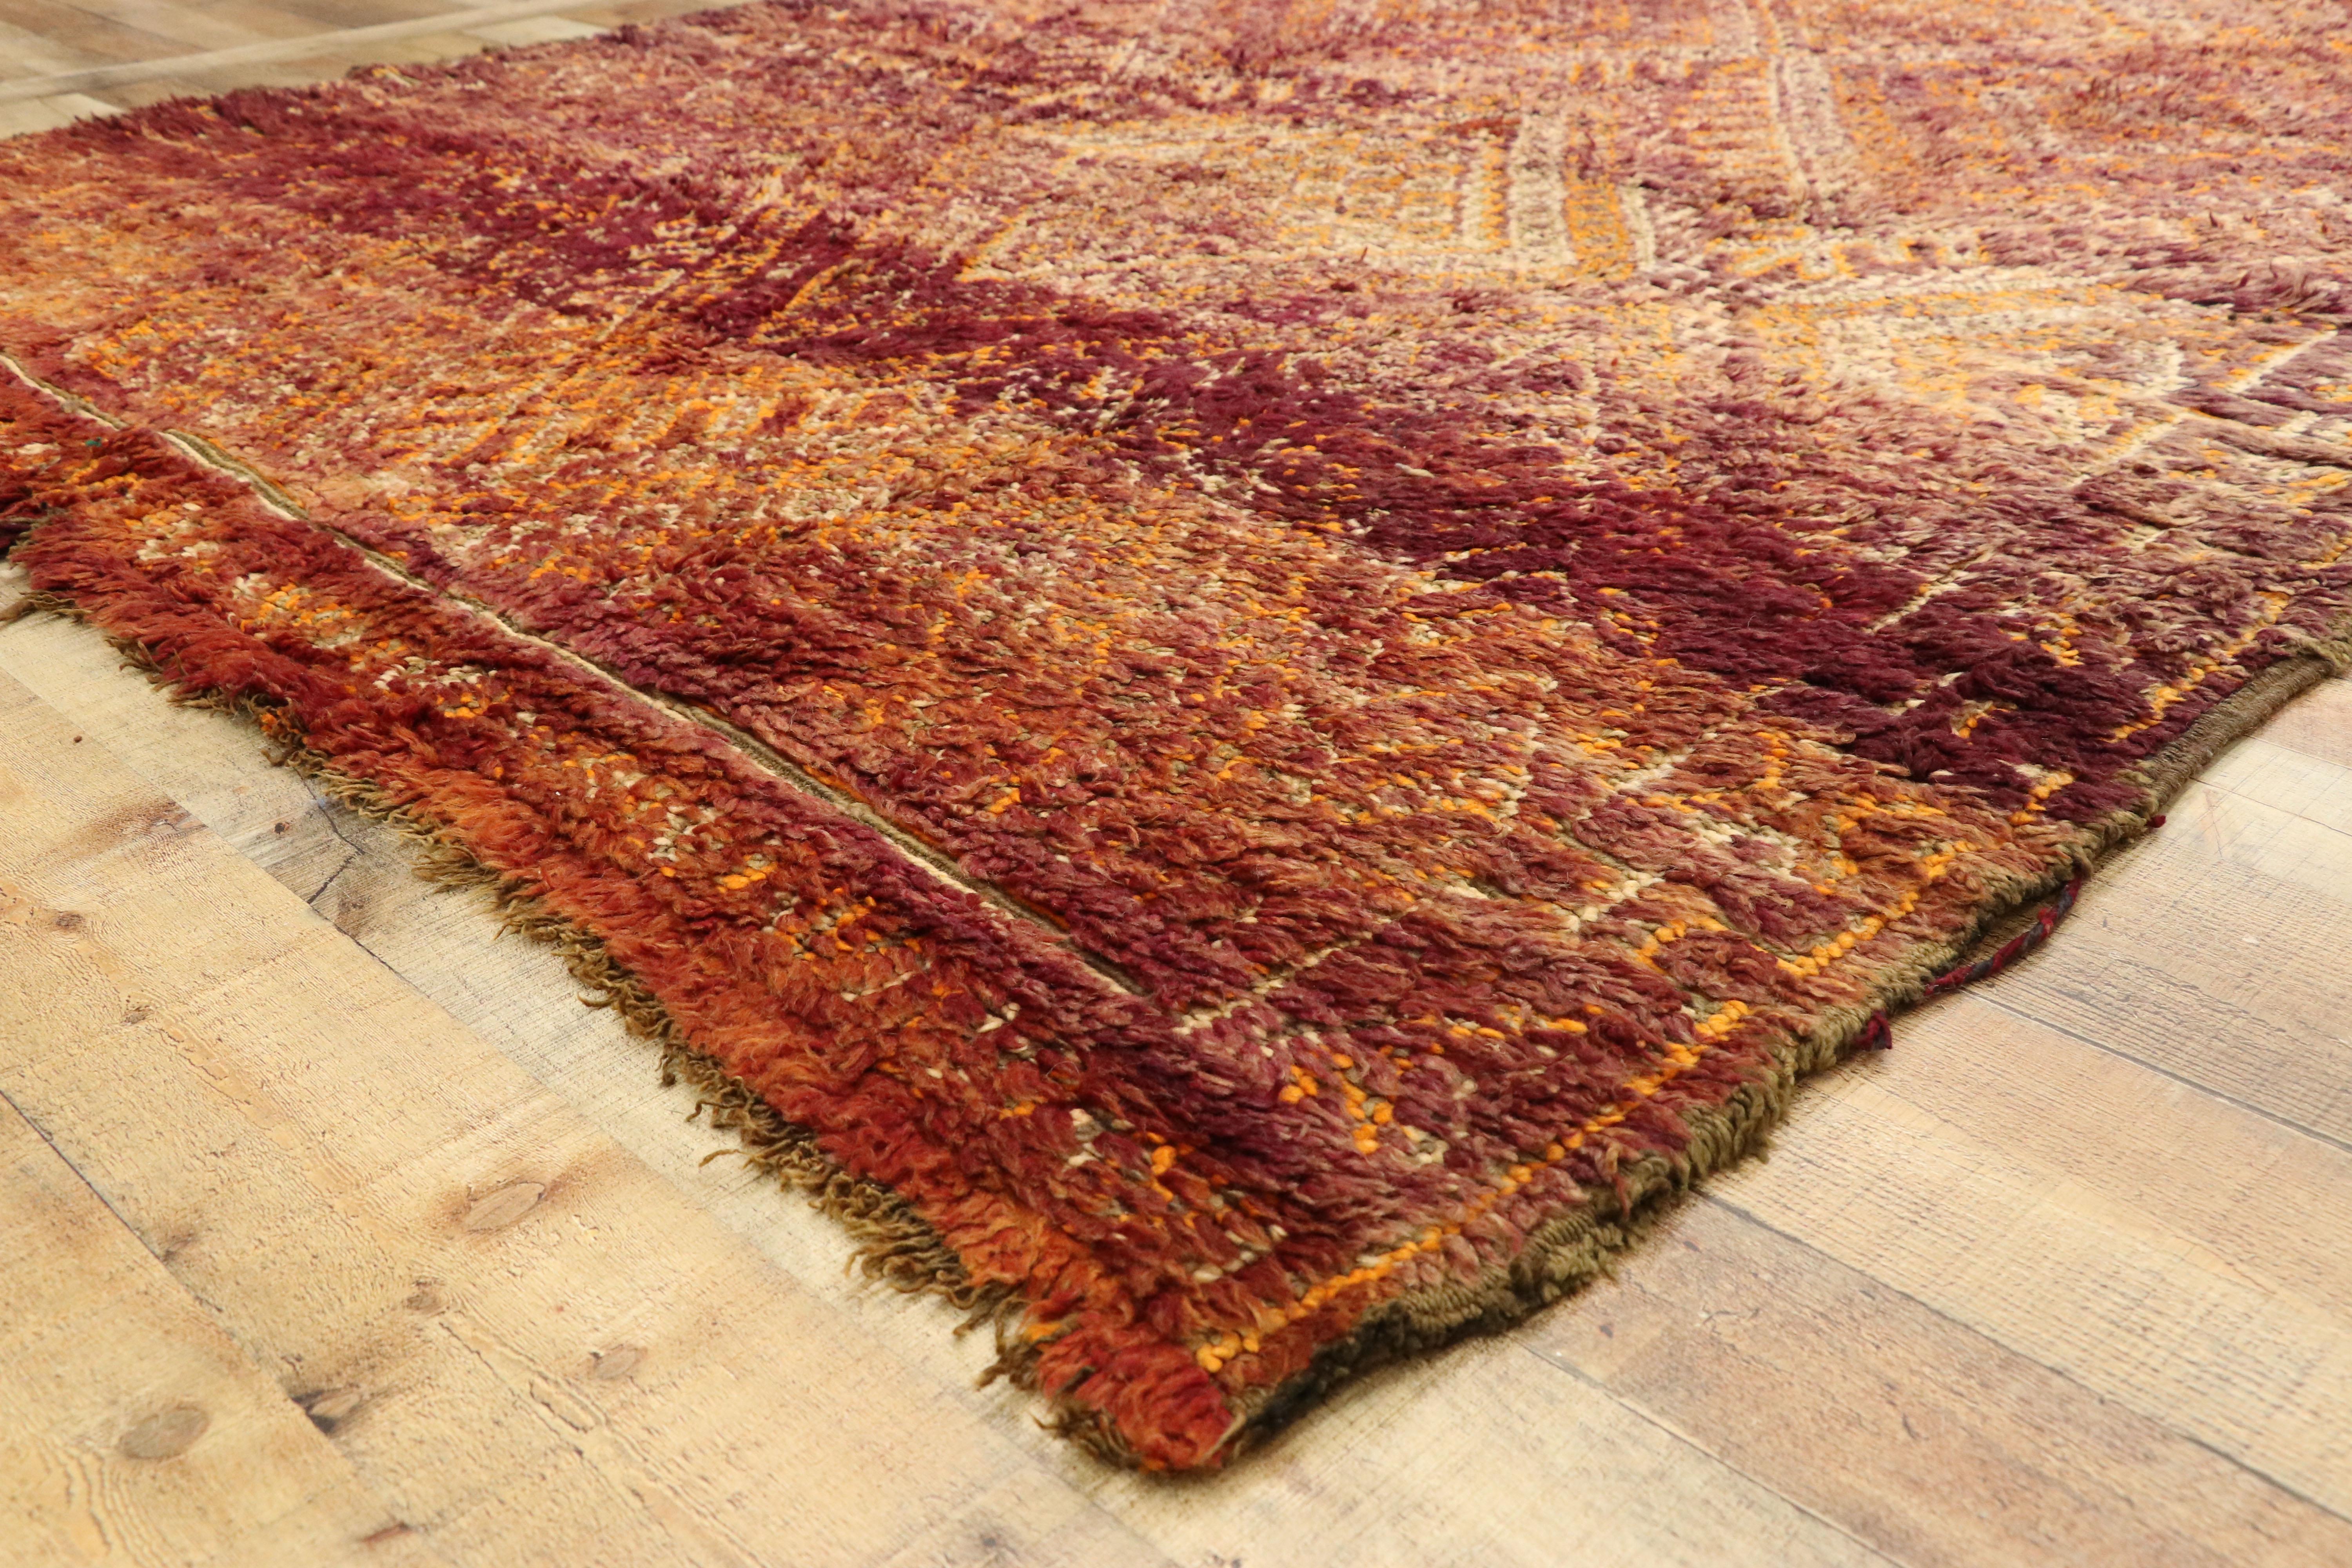 20th Century Vintage Beni M'Guild Moroccan Rug with a Diamond Pattern in Warm, Spicy Hues